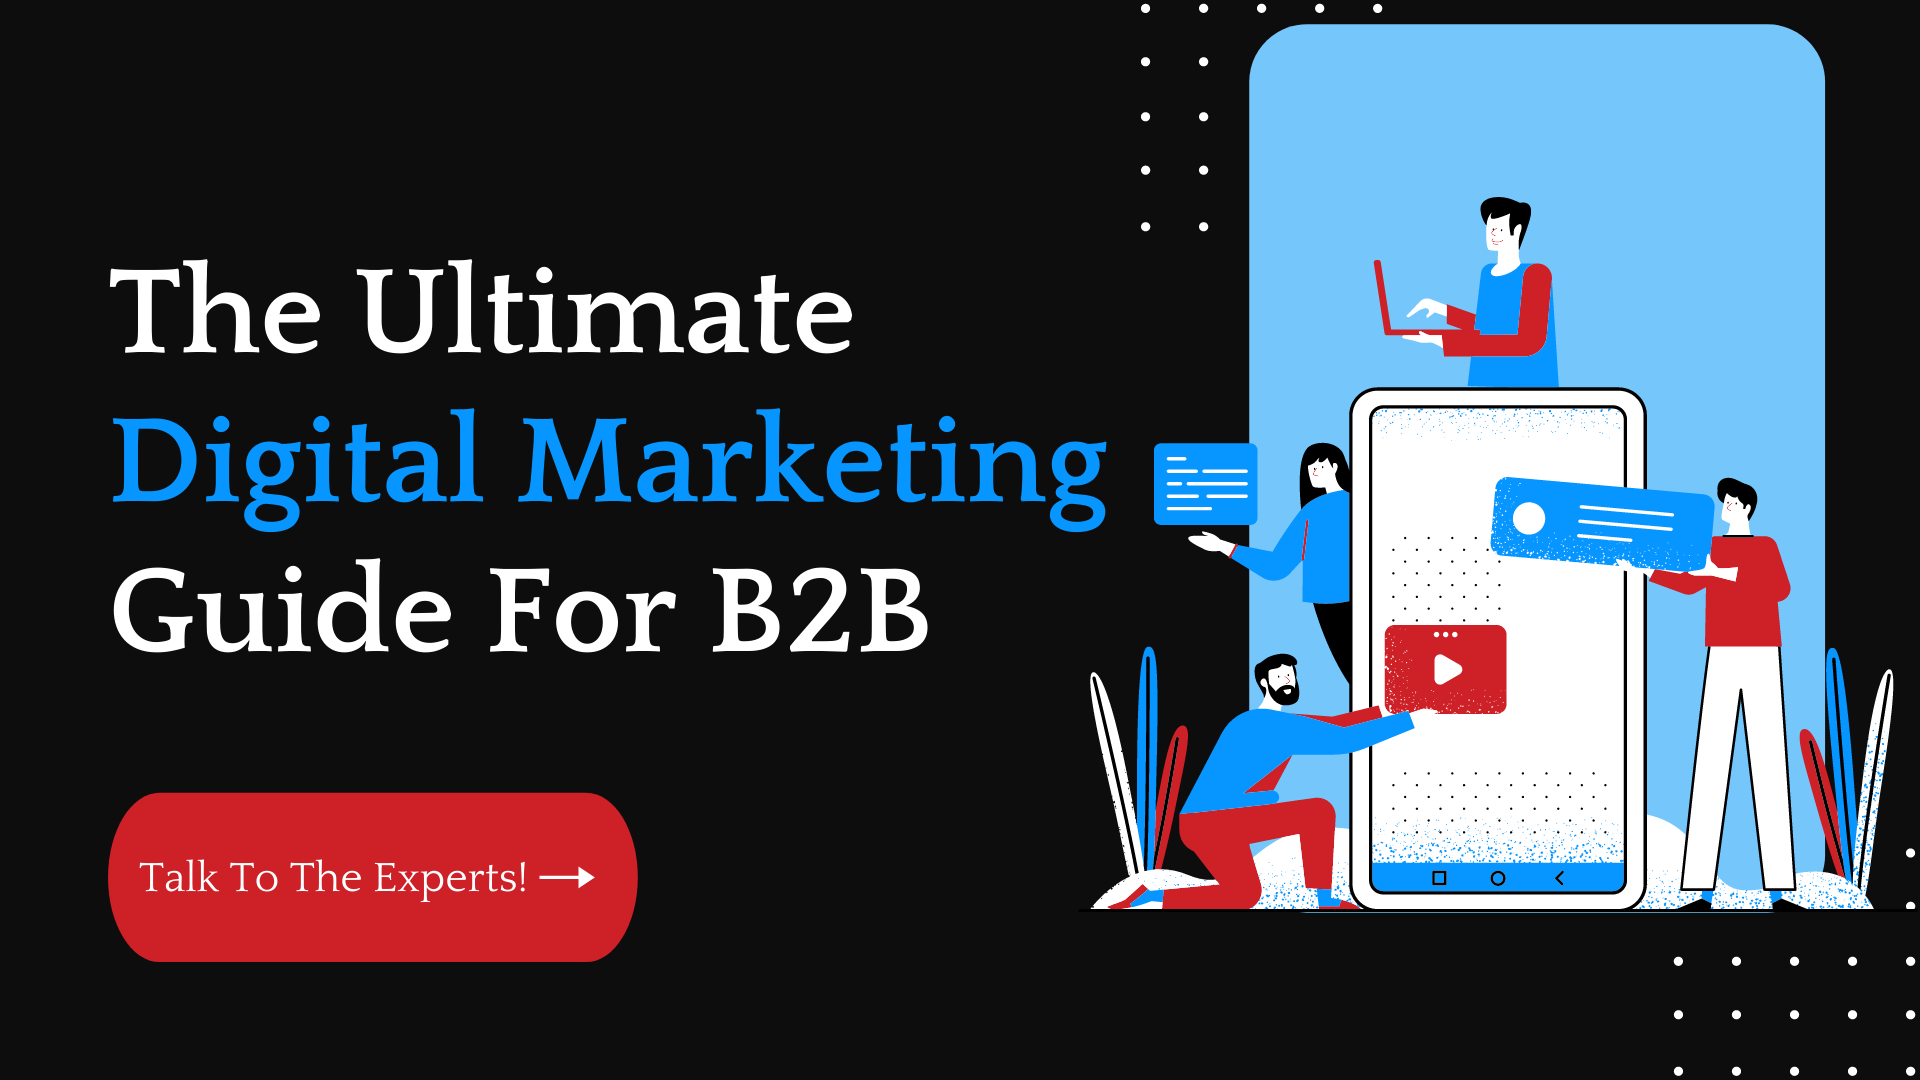 The Ultimate Digital Marketing Guide For B2B